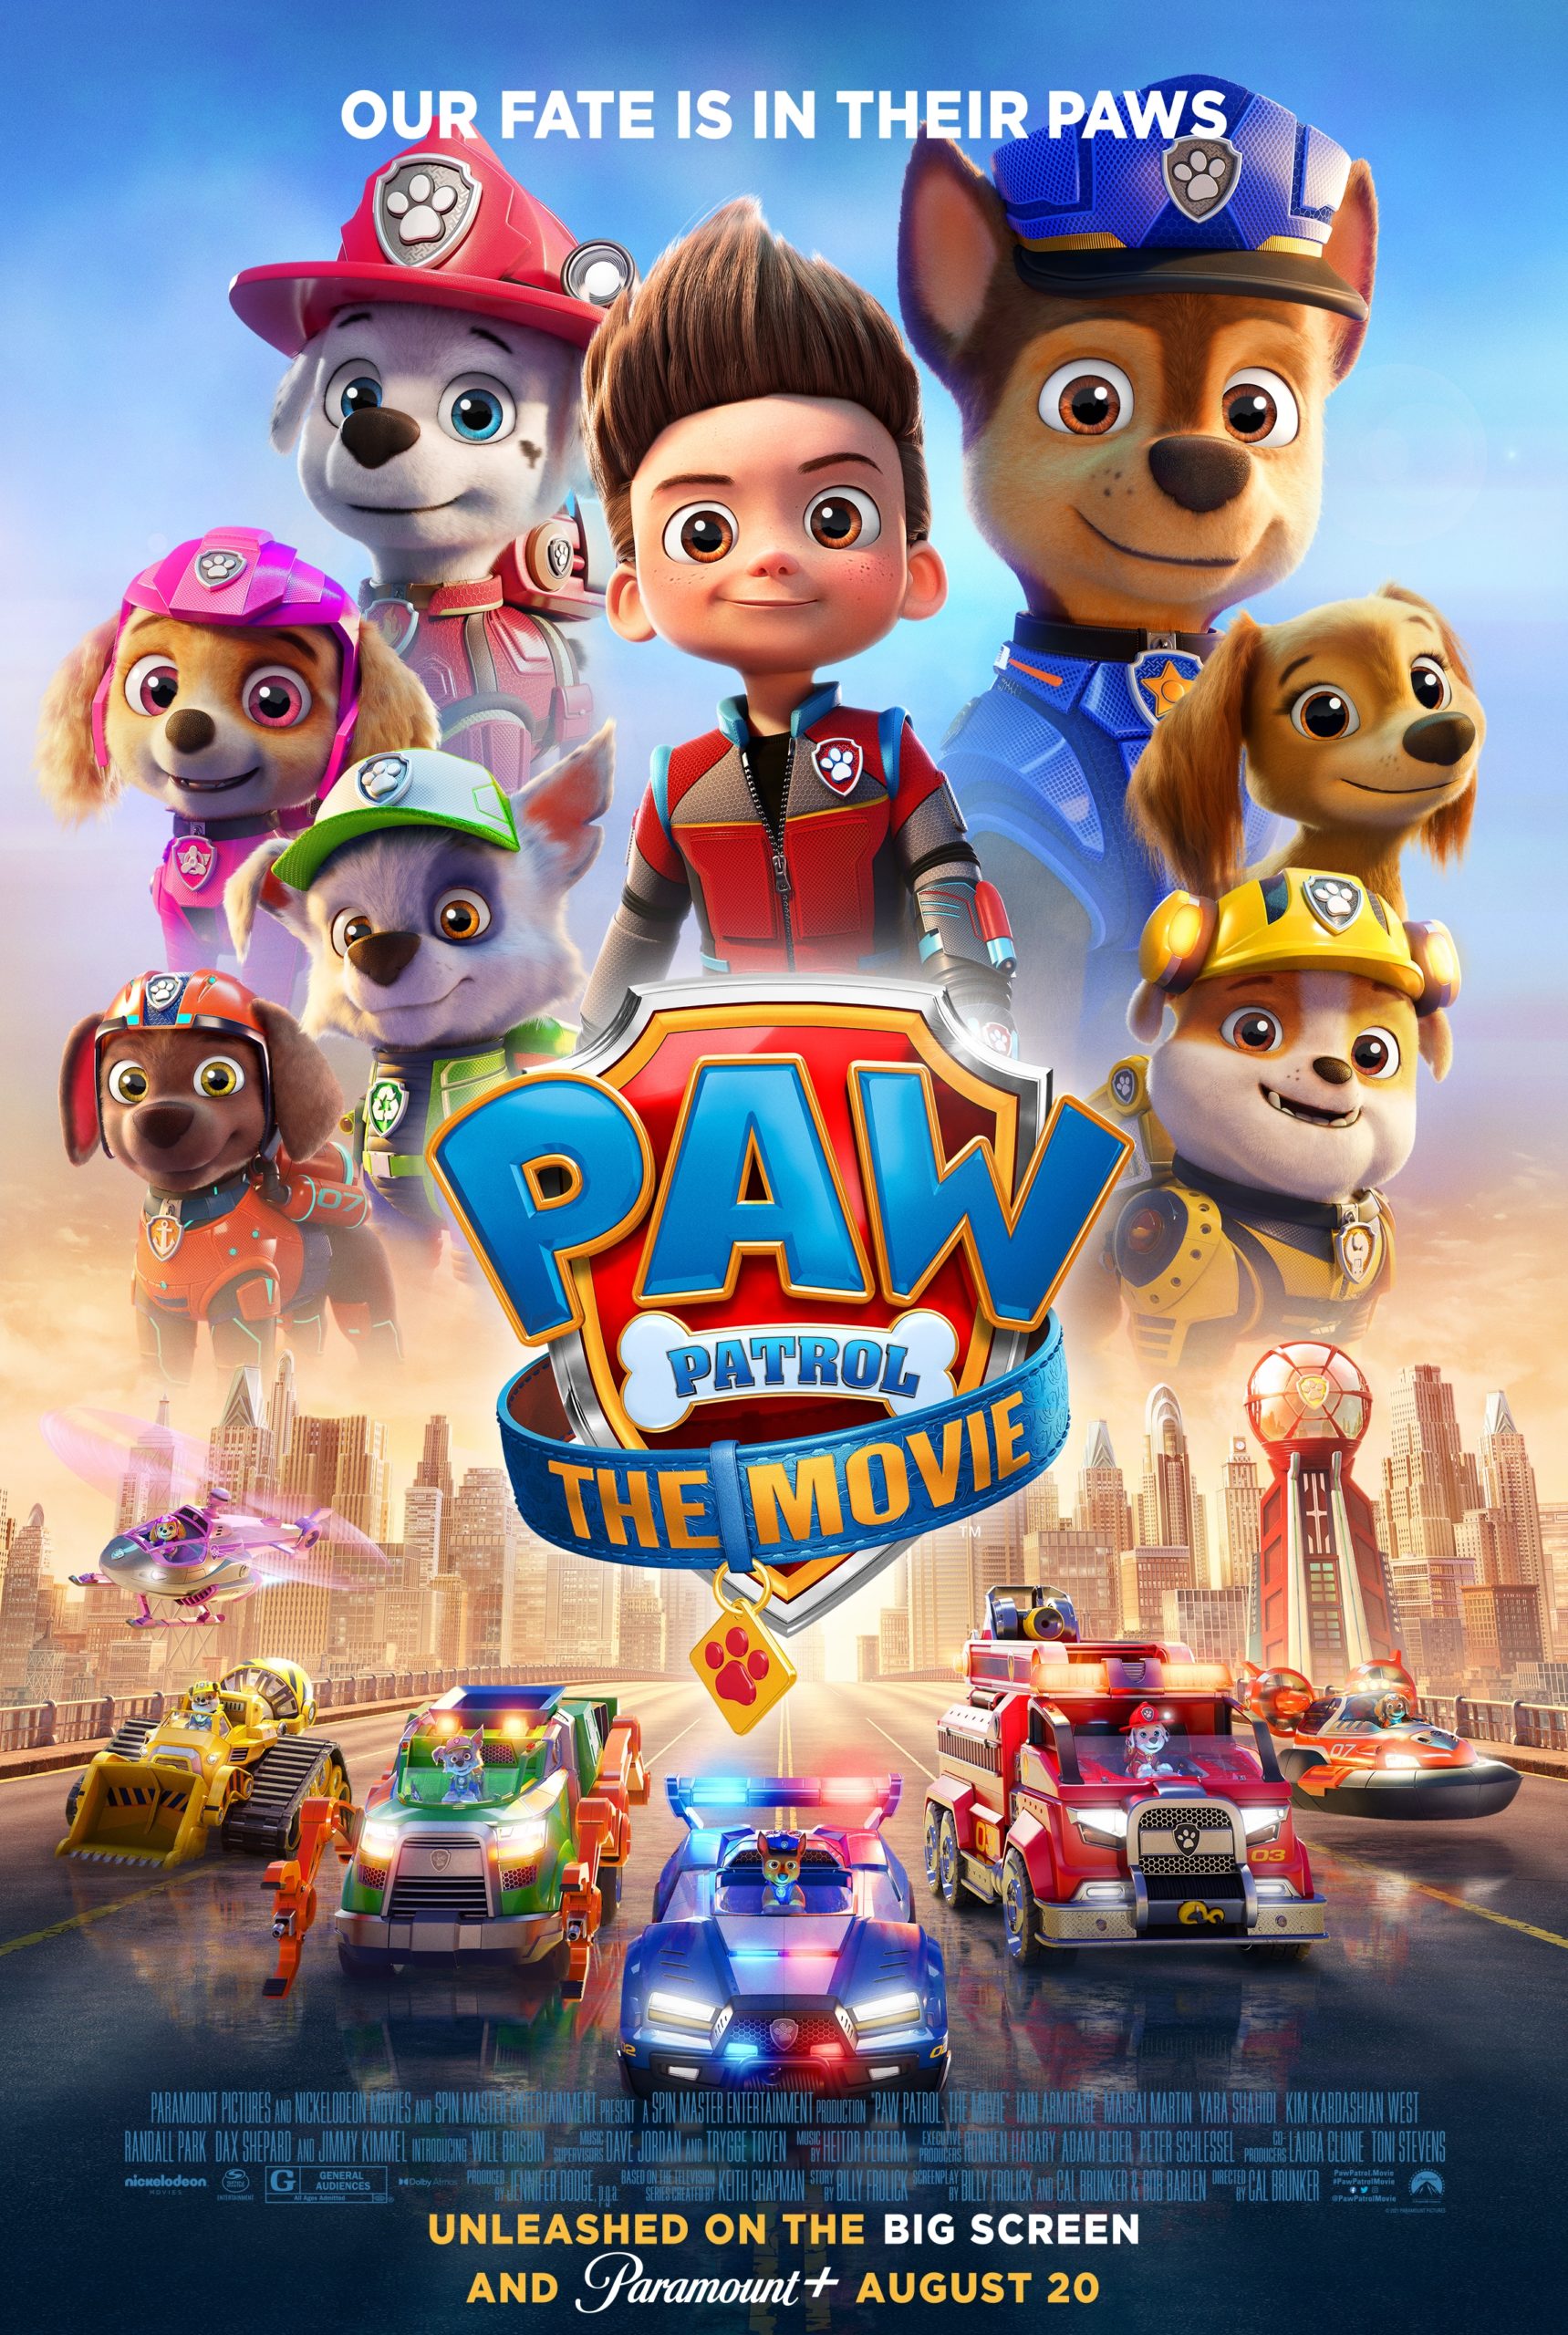 PAW PATROL THE MOVIE Arrives In Theatres and Streaming on Paramount+ on August 20, 2021 No(R